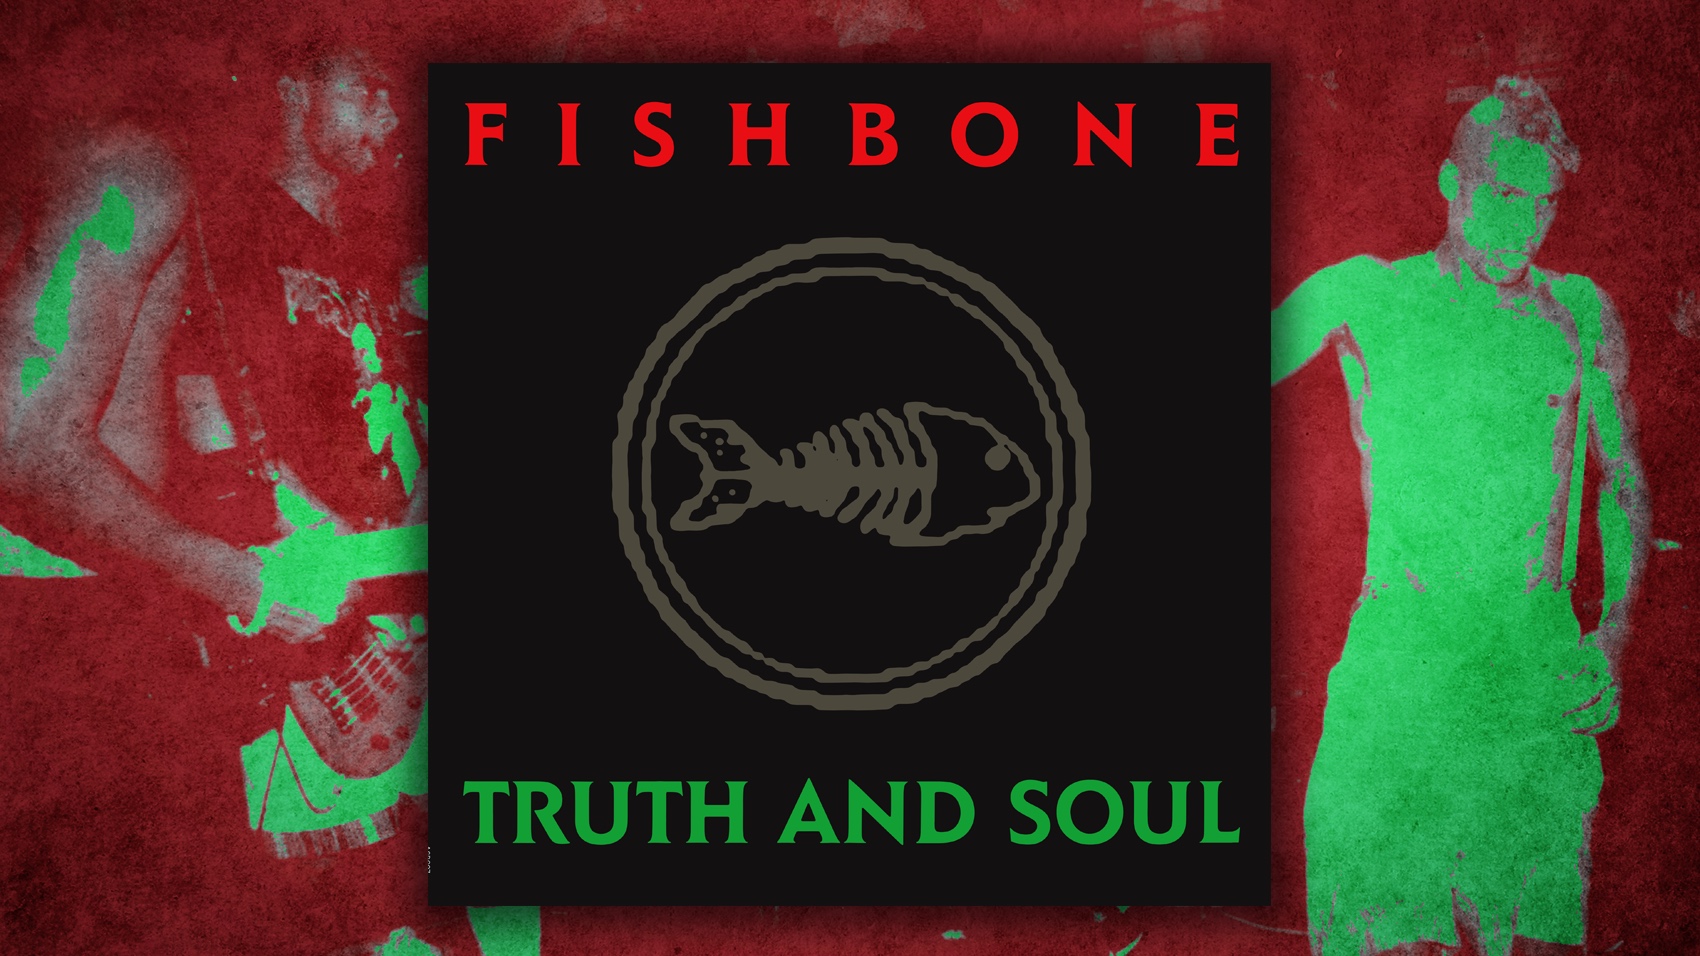 This Is Fishbone - playlist by Spotify